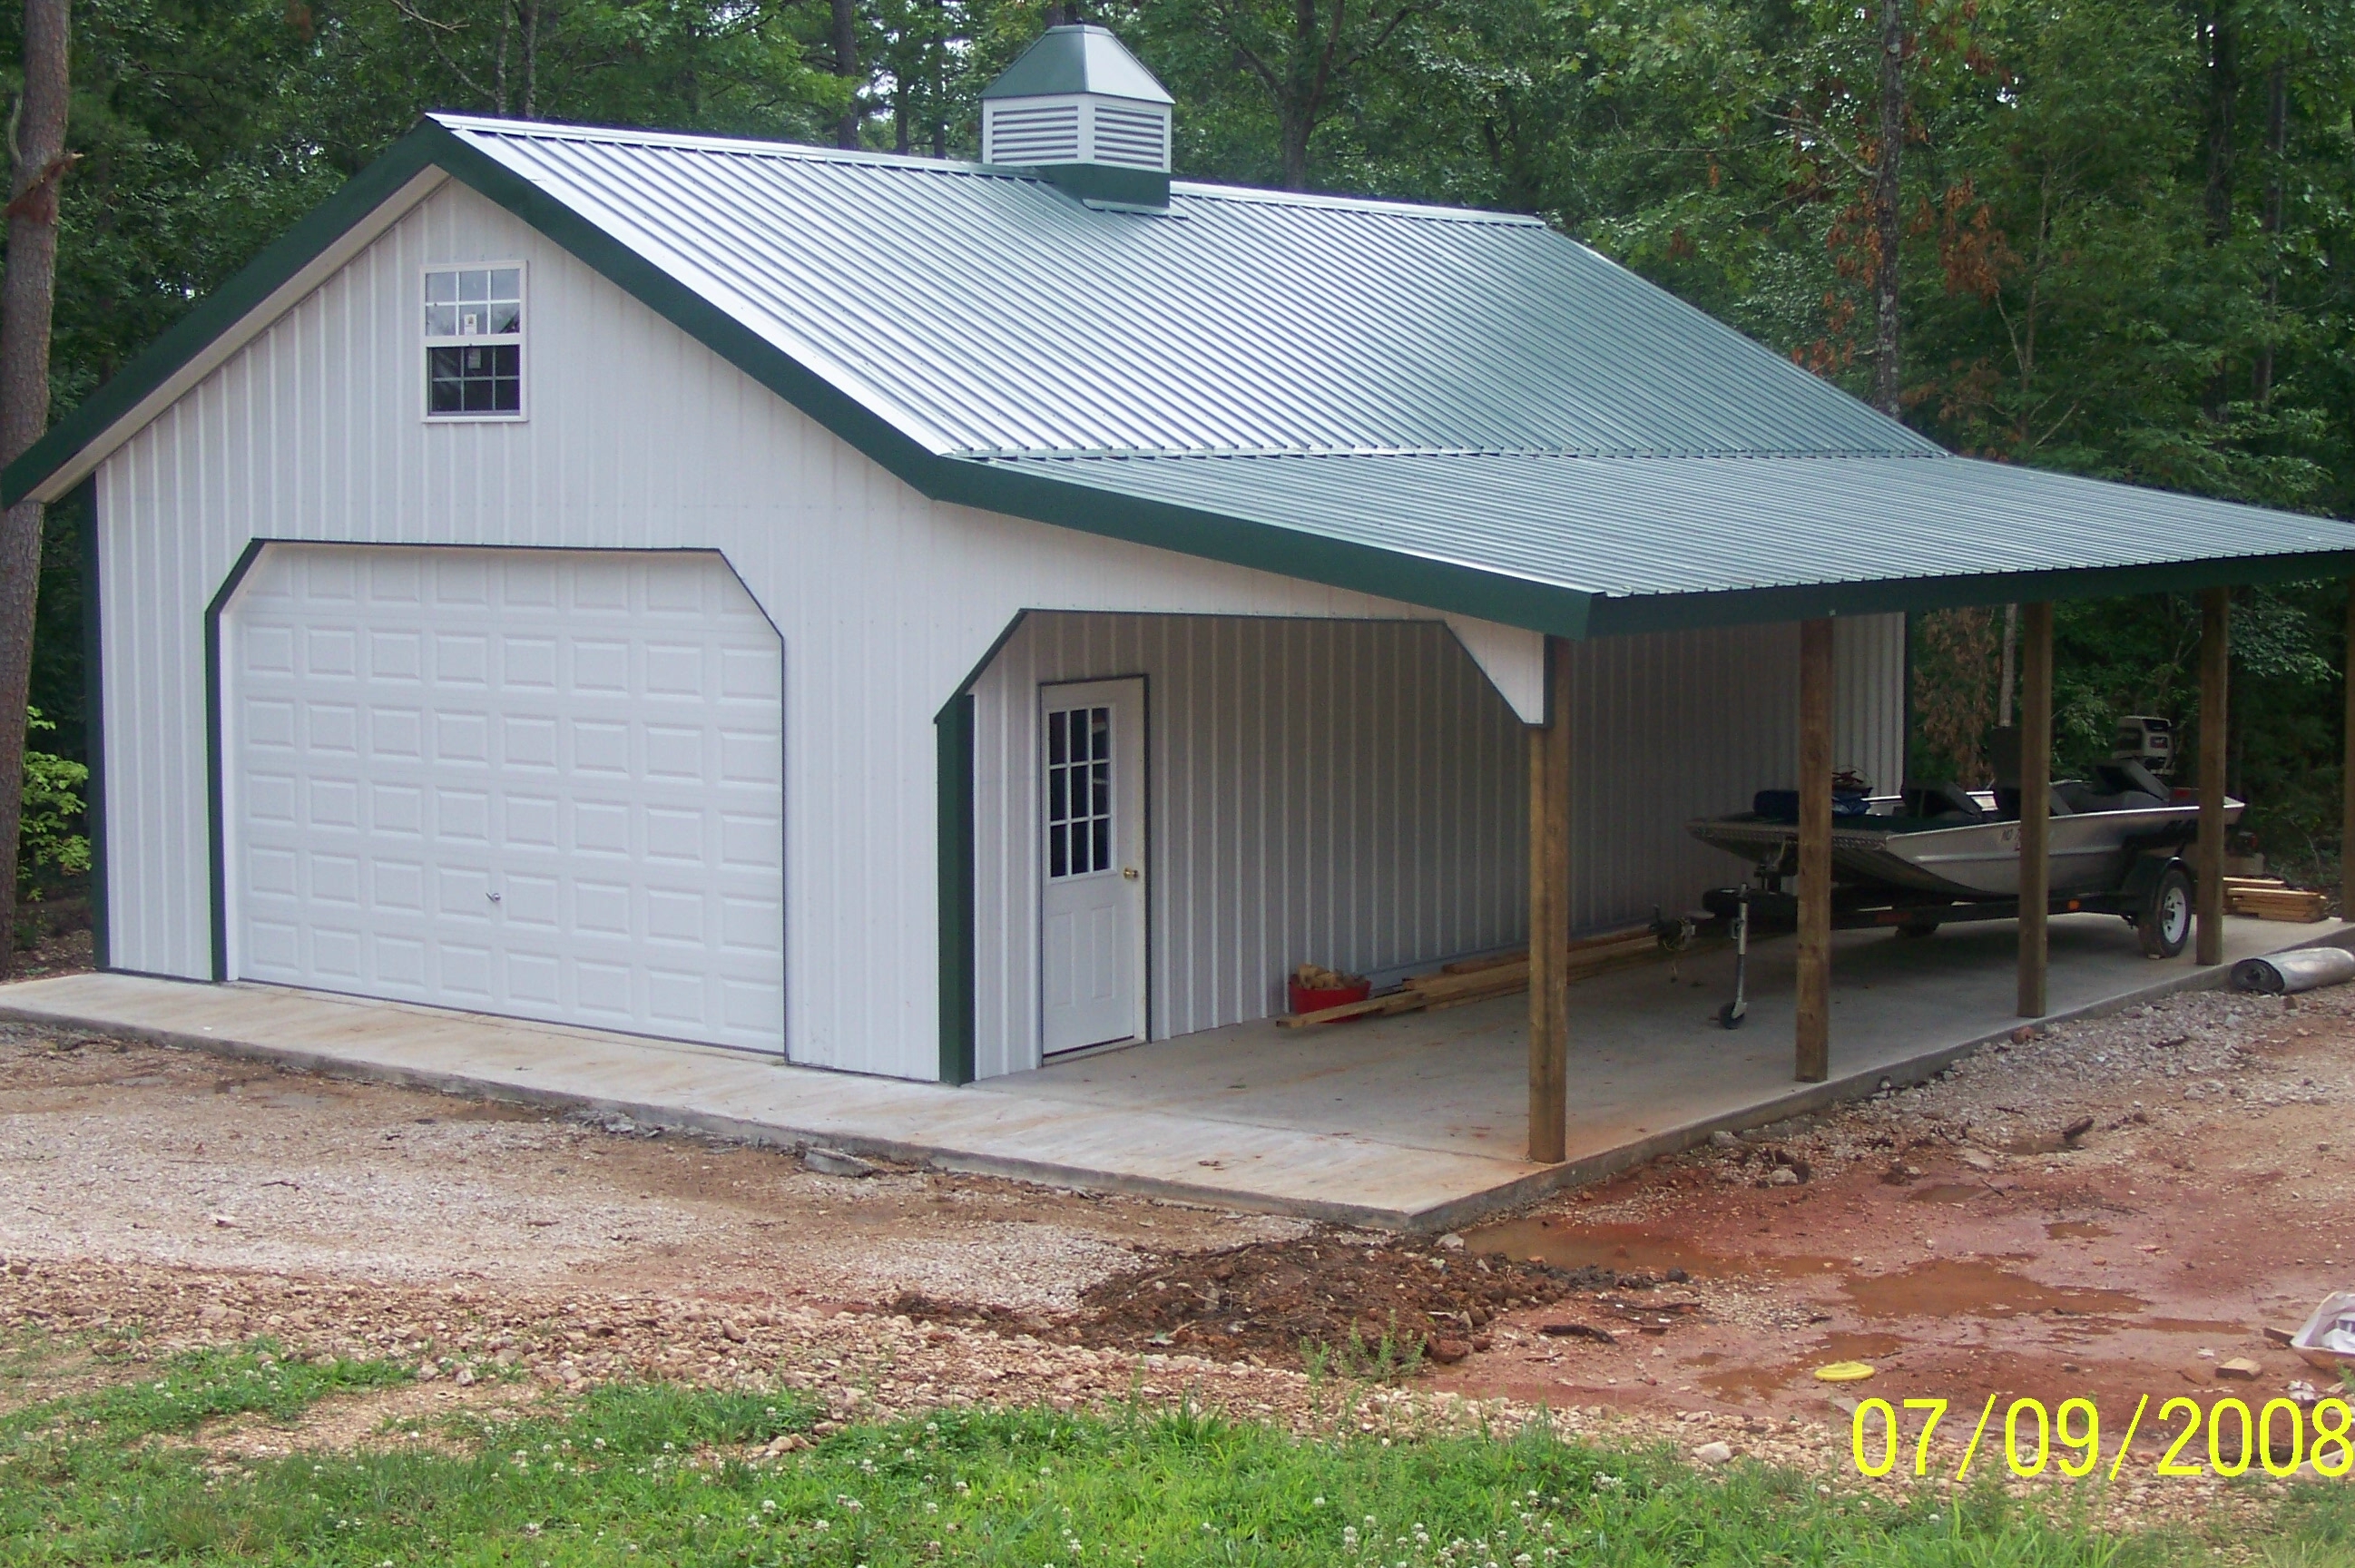 workshop areas, horse barn plans, workshop designs and plans for small 